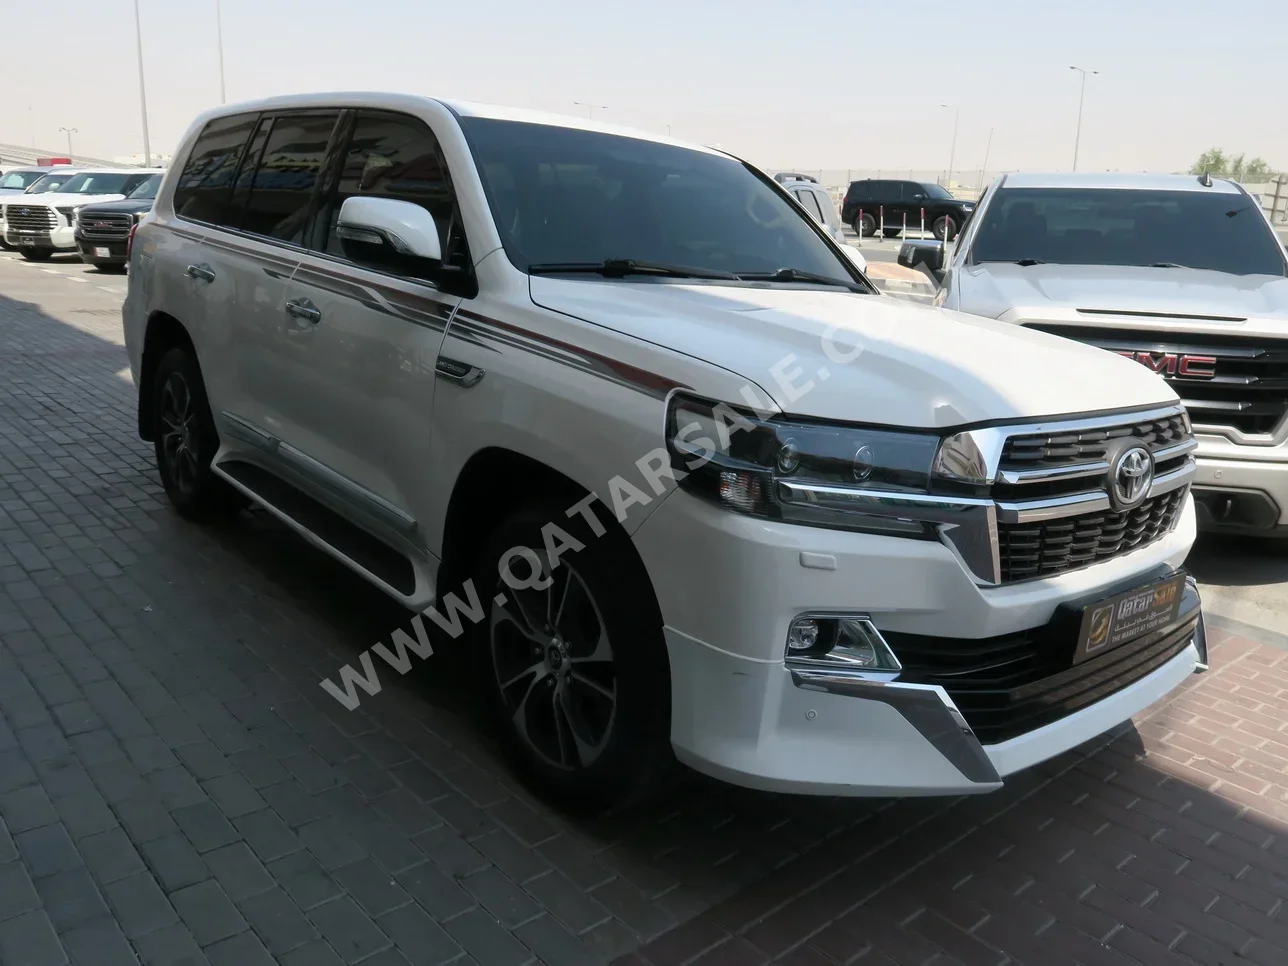 Toyota  Land Cruiser  GXR- Grand Touring  2020  Automatic  69,000 Km  8 Cylinder  Four Wheel Drive (4WD)  SUV  White